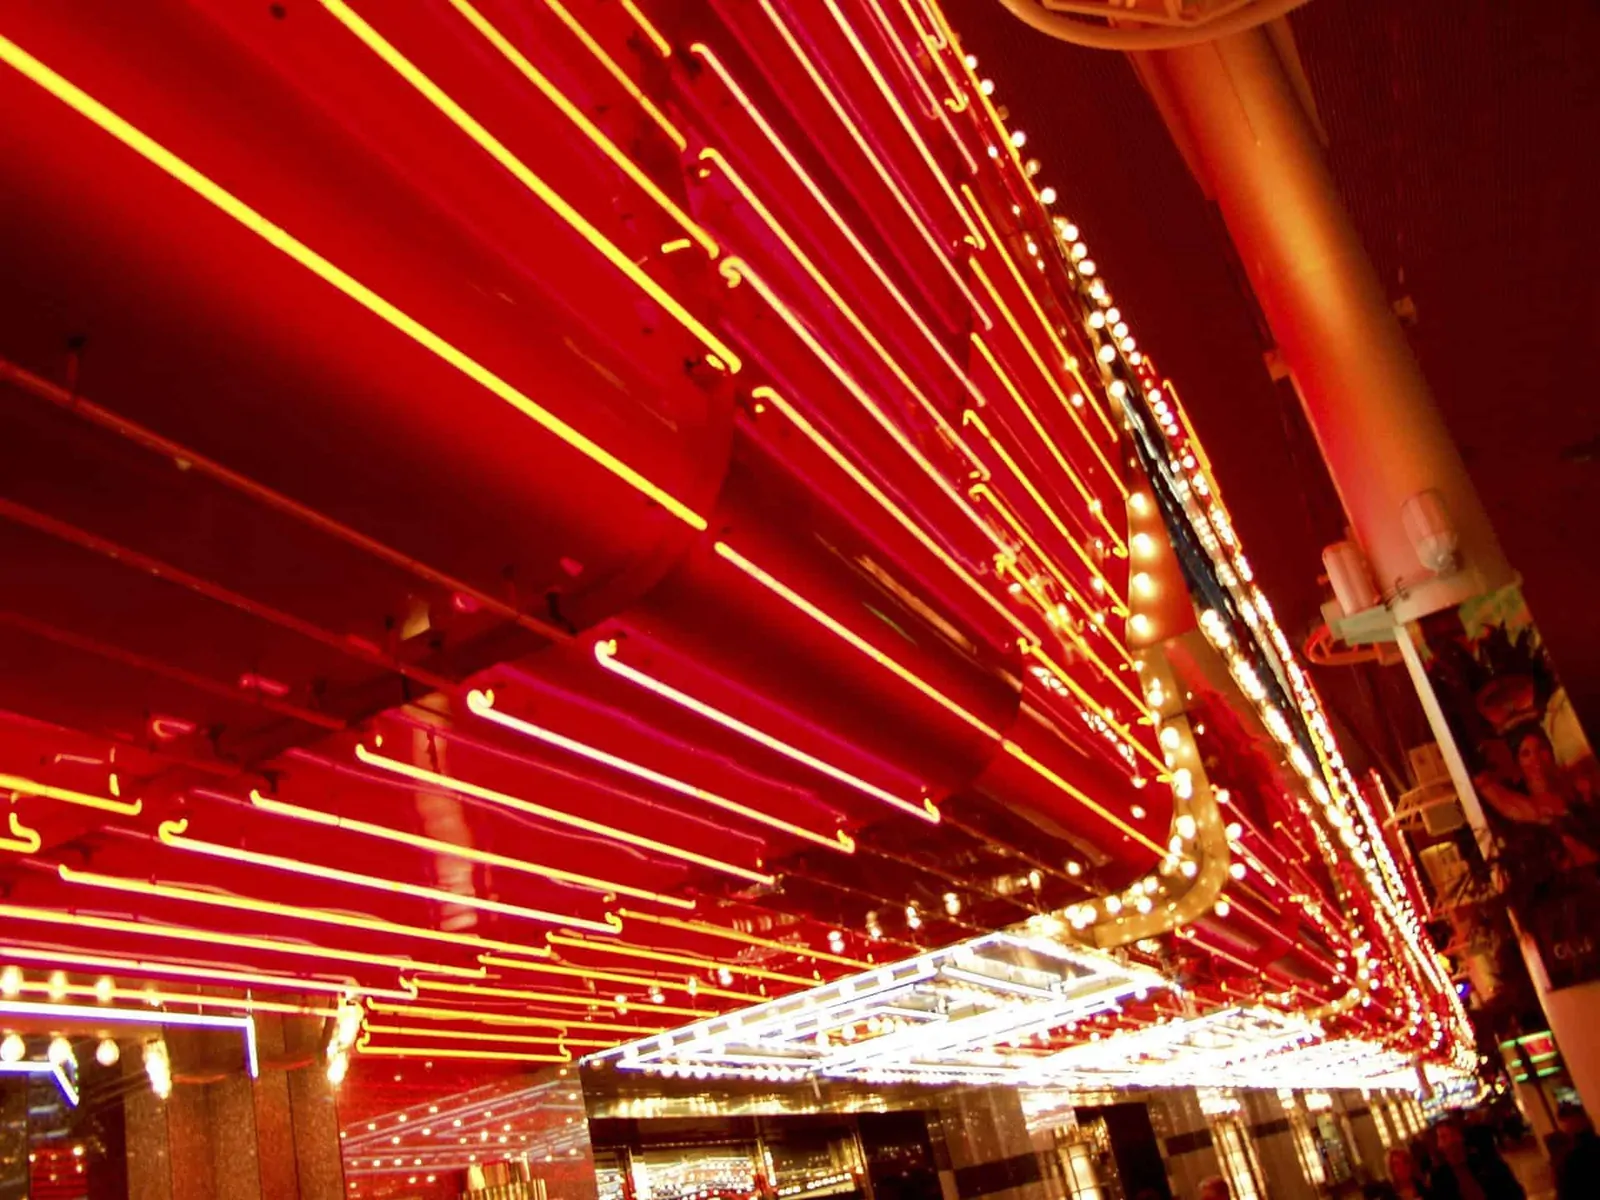 A long row of red and yellow neon lights on a building - Las Vegas